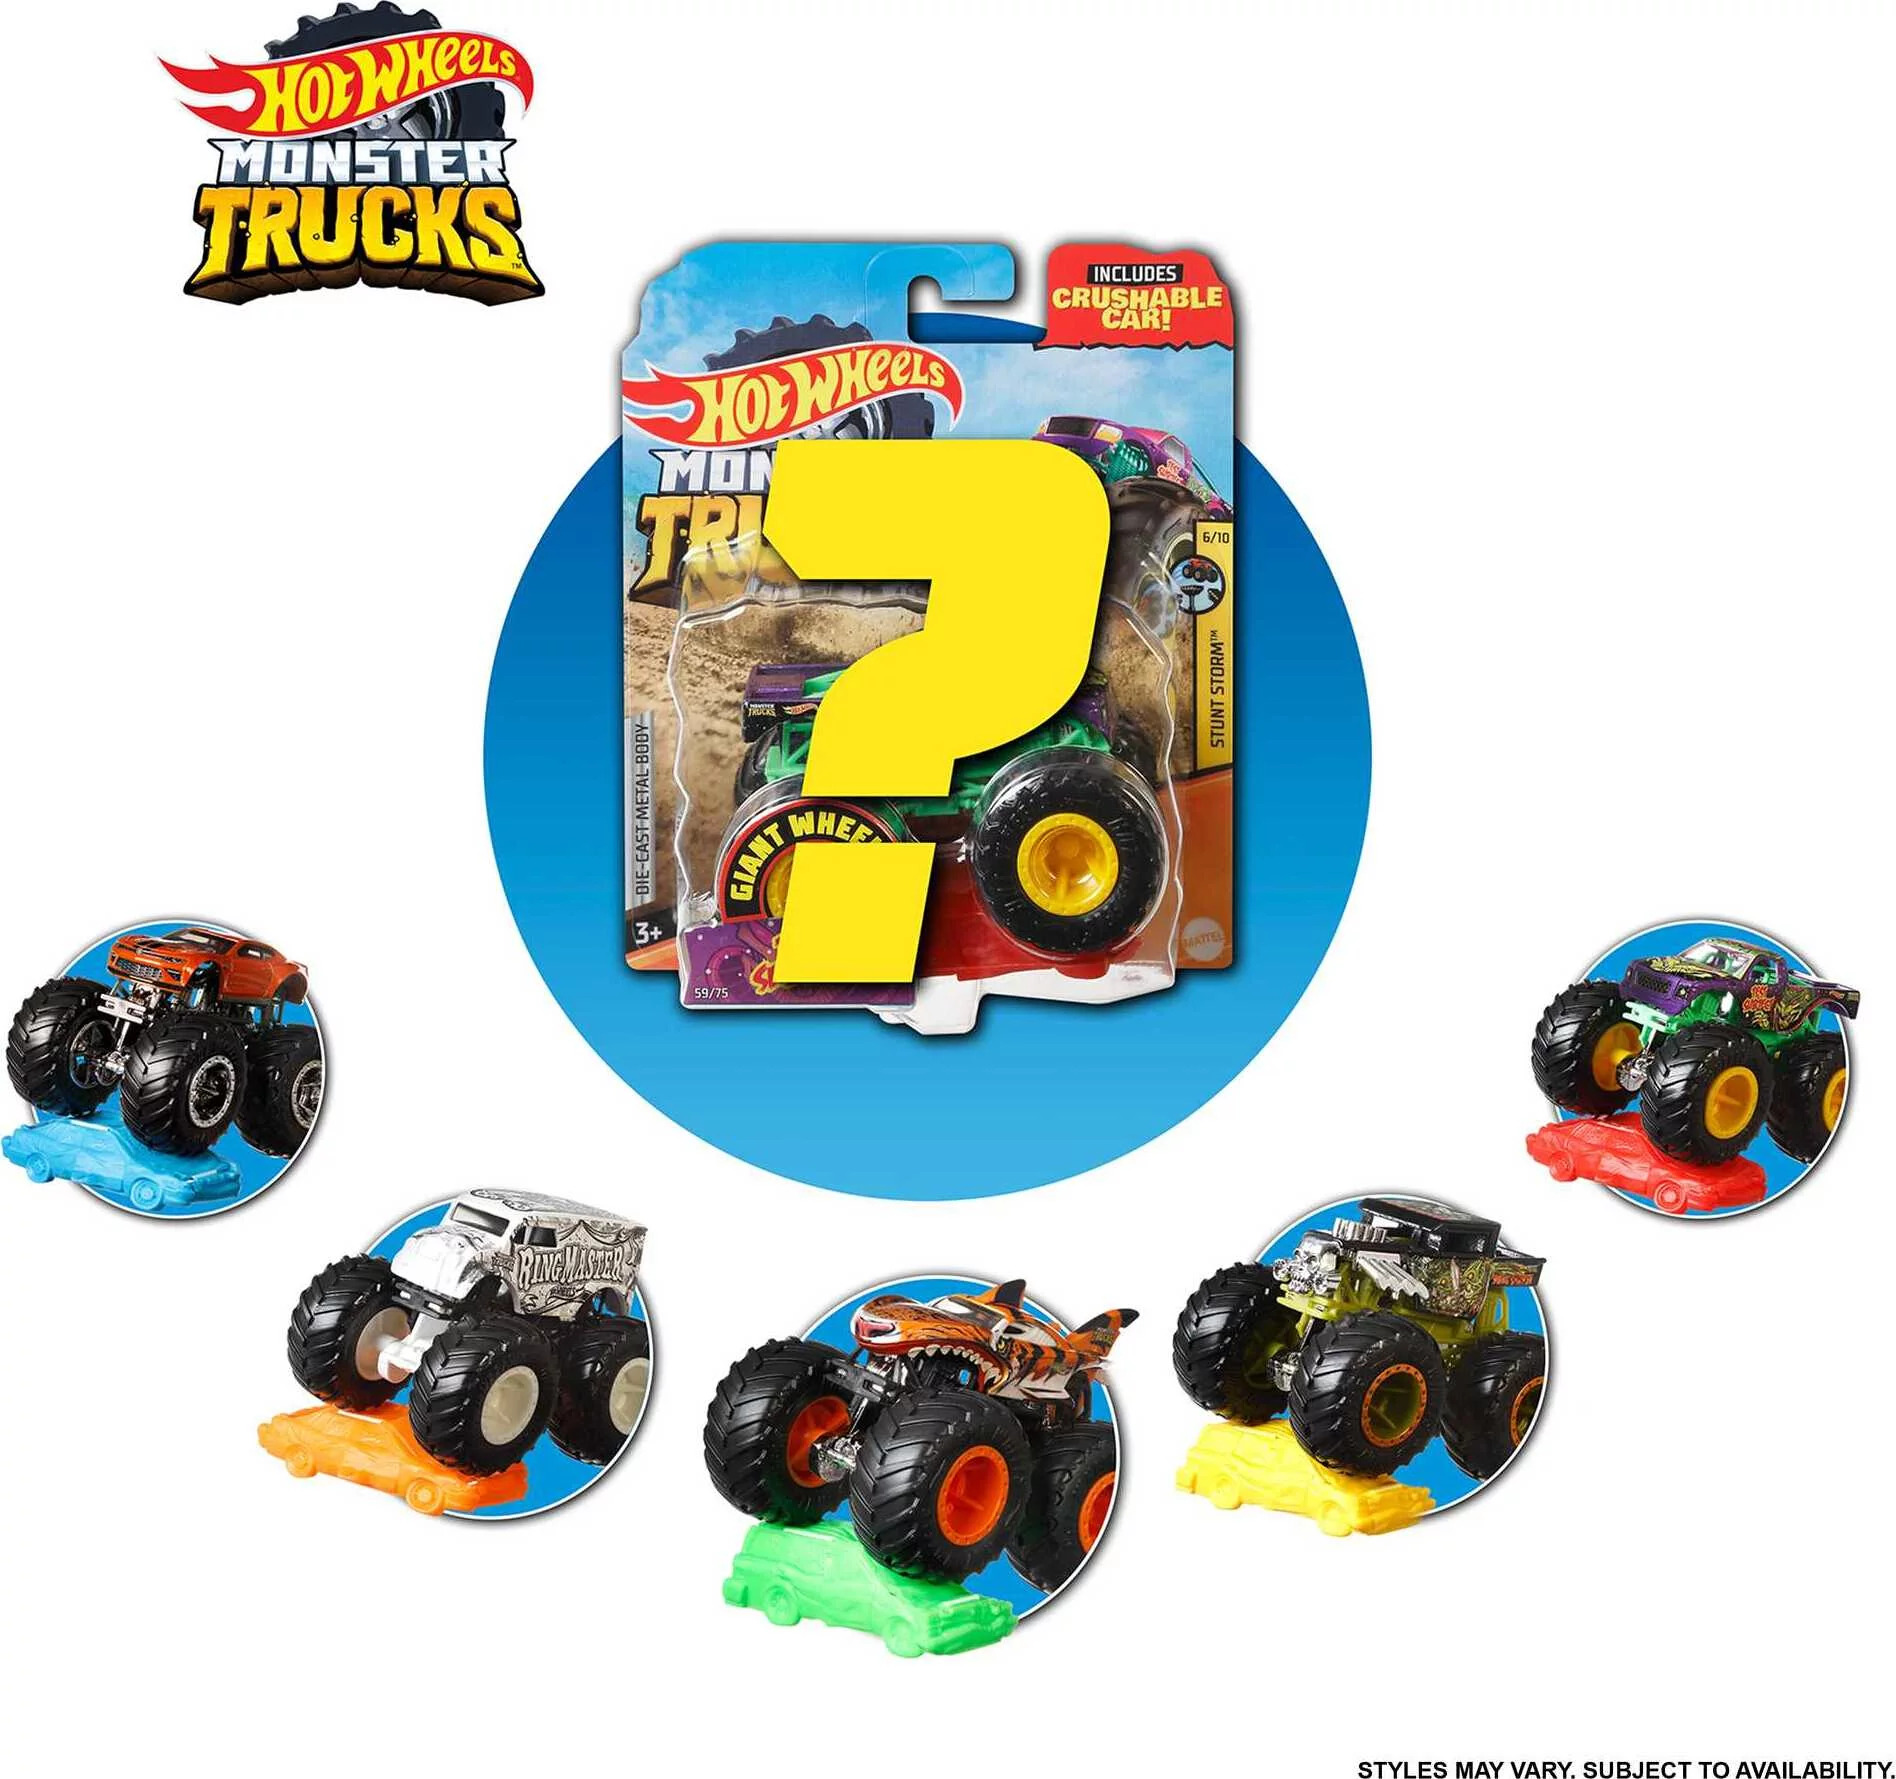 Hot Wheels Monster Trucks Selection Of 1:64 Scale Collectible Die-Cast Toy Trucks (Styles May Vary)